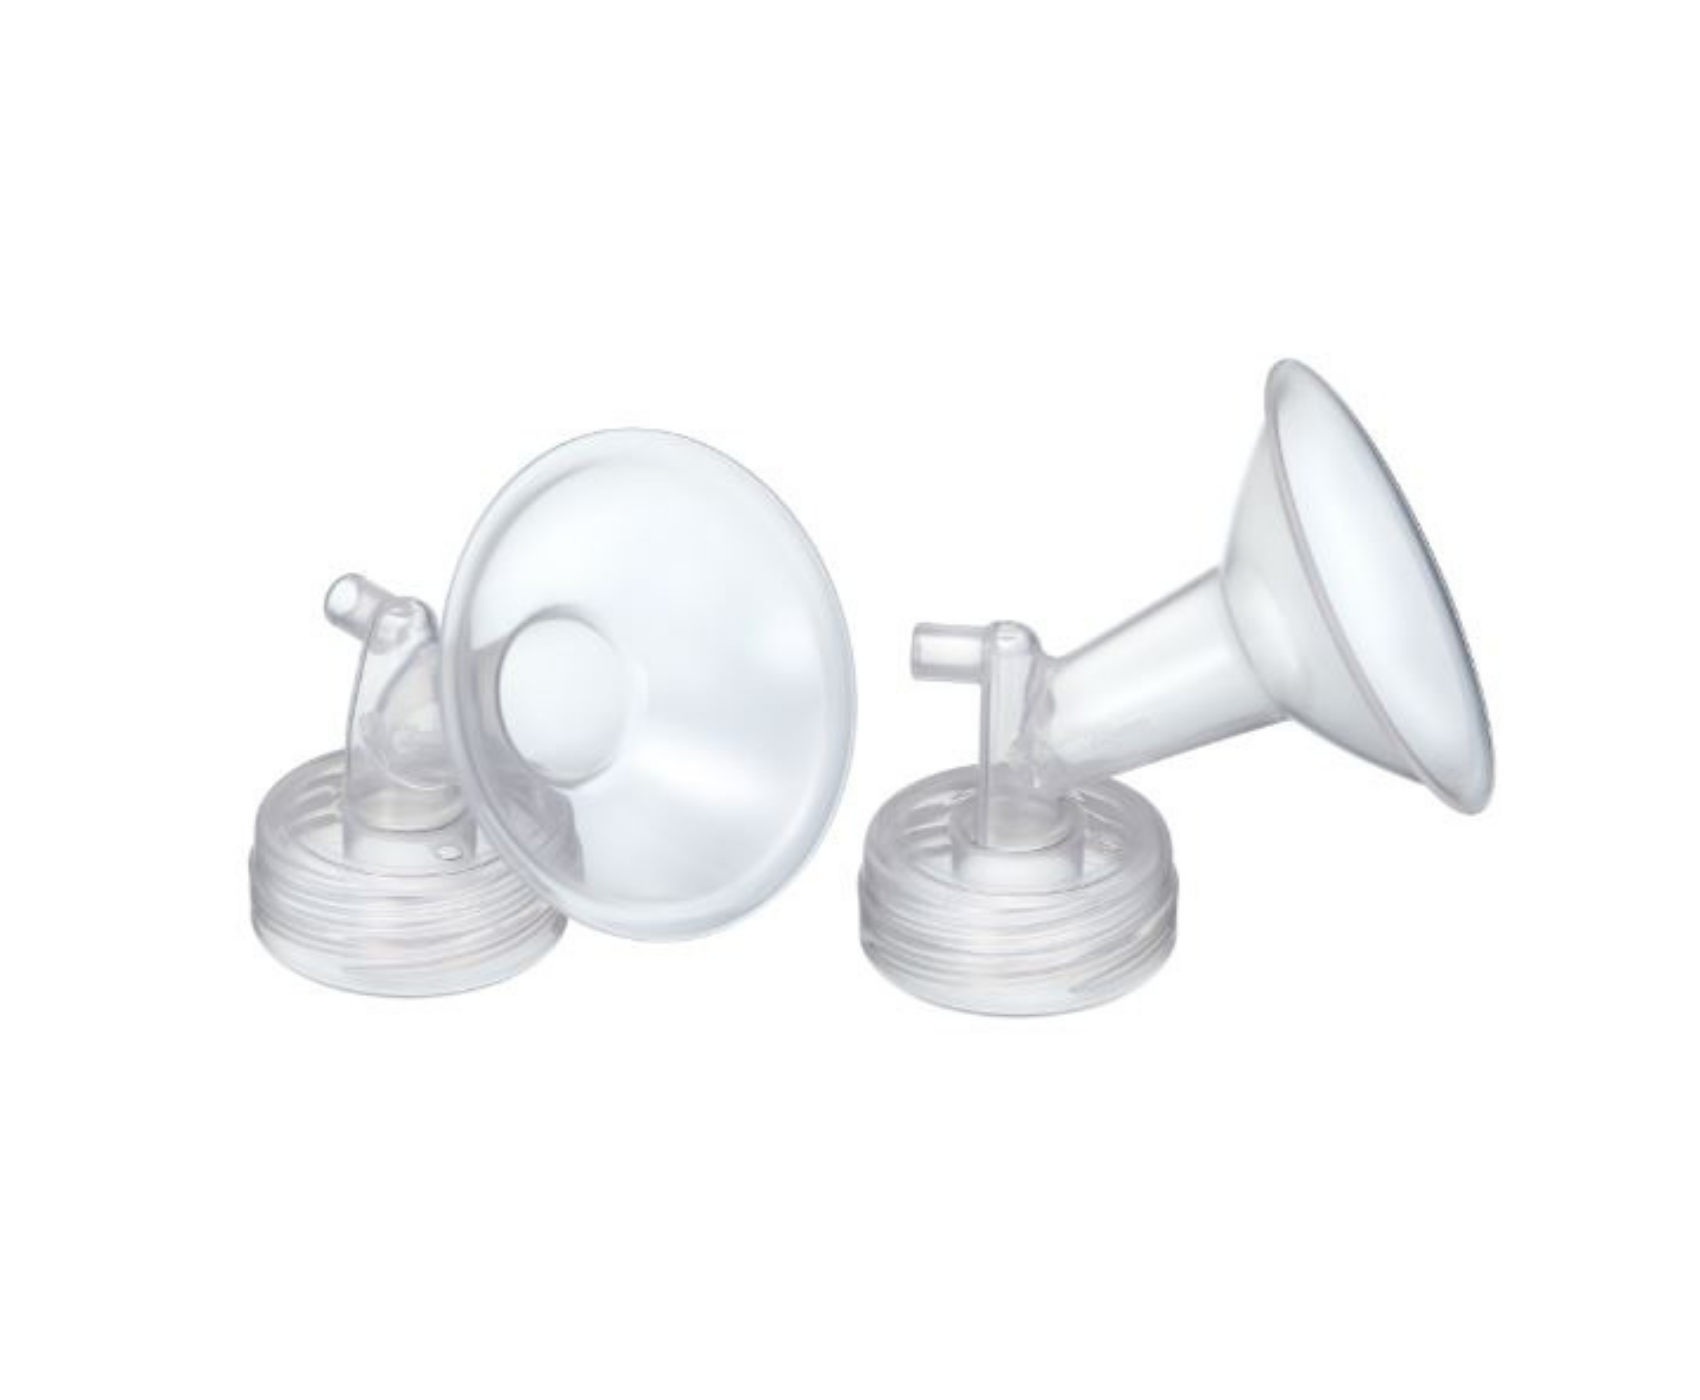 Cimilre Breast Shields - Acelleron Medical Products